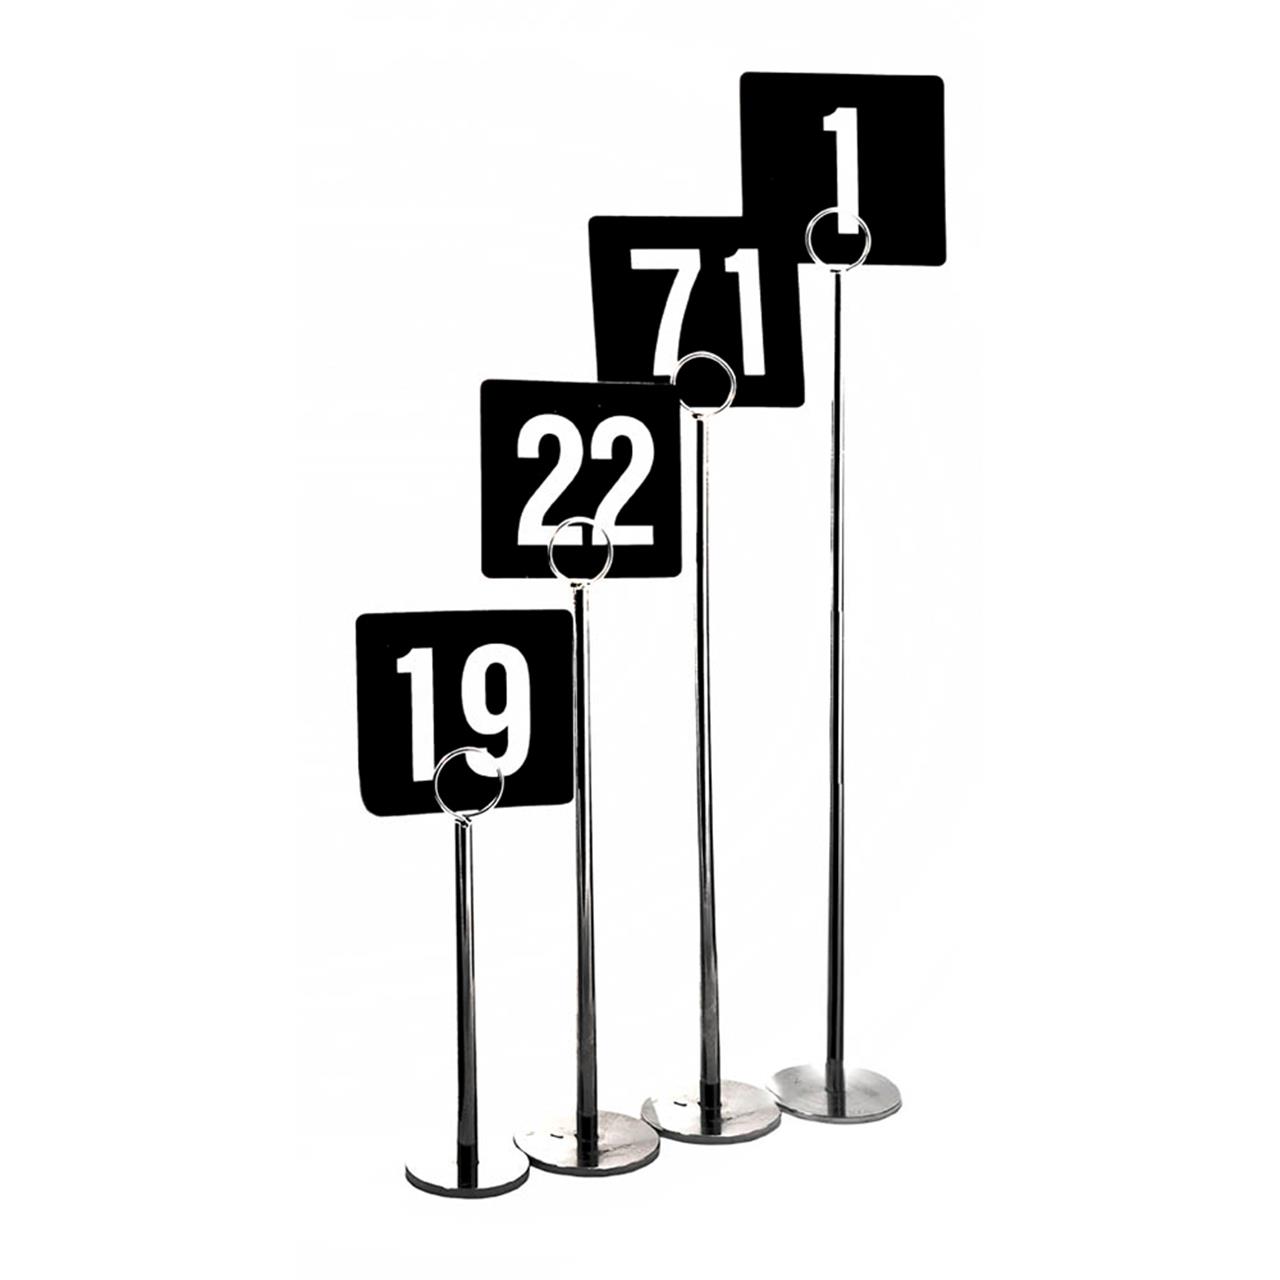 KH Table Numbers Plastic White On Black